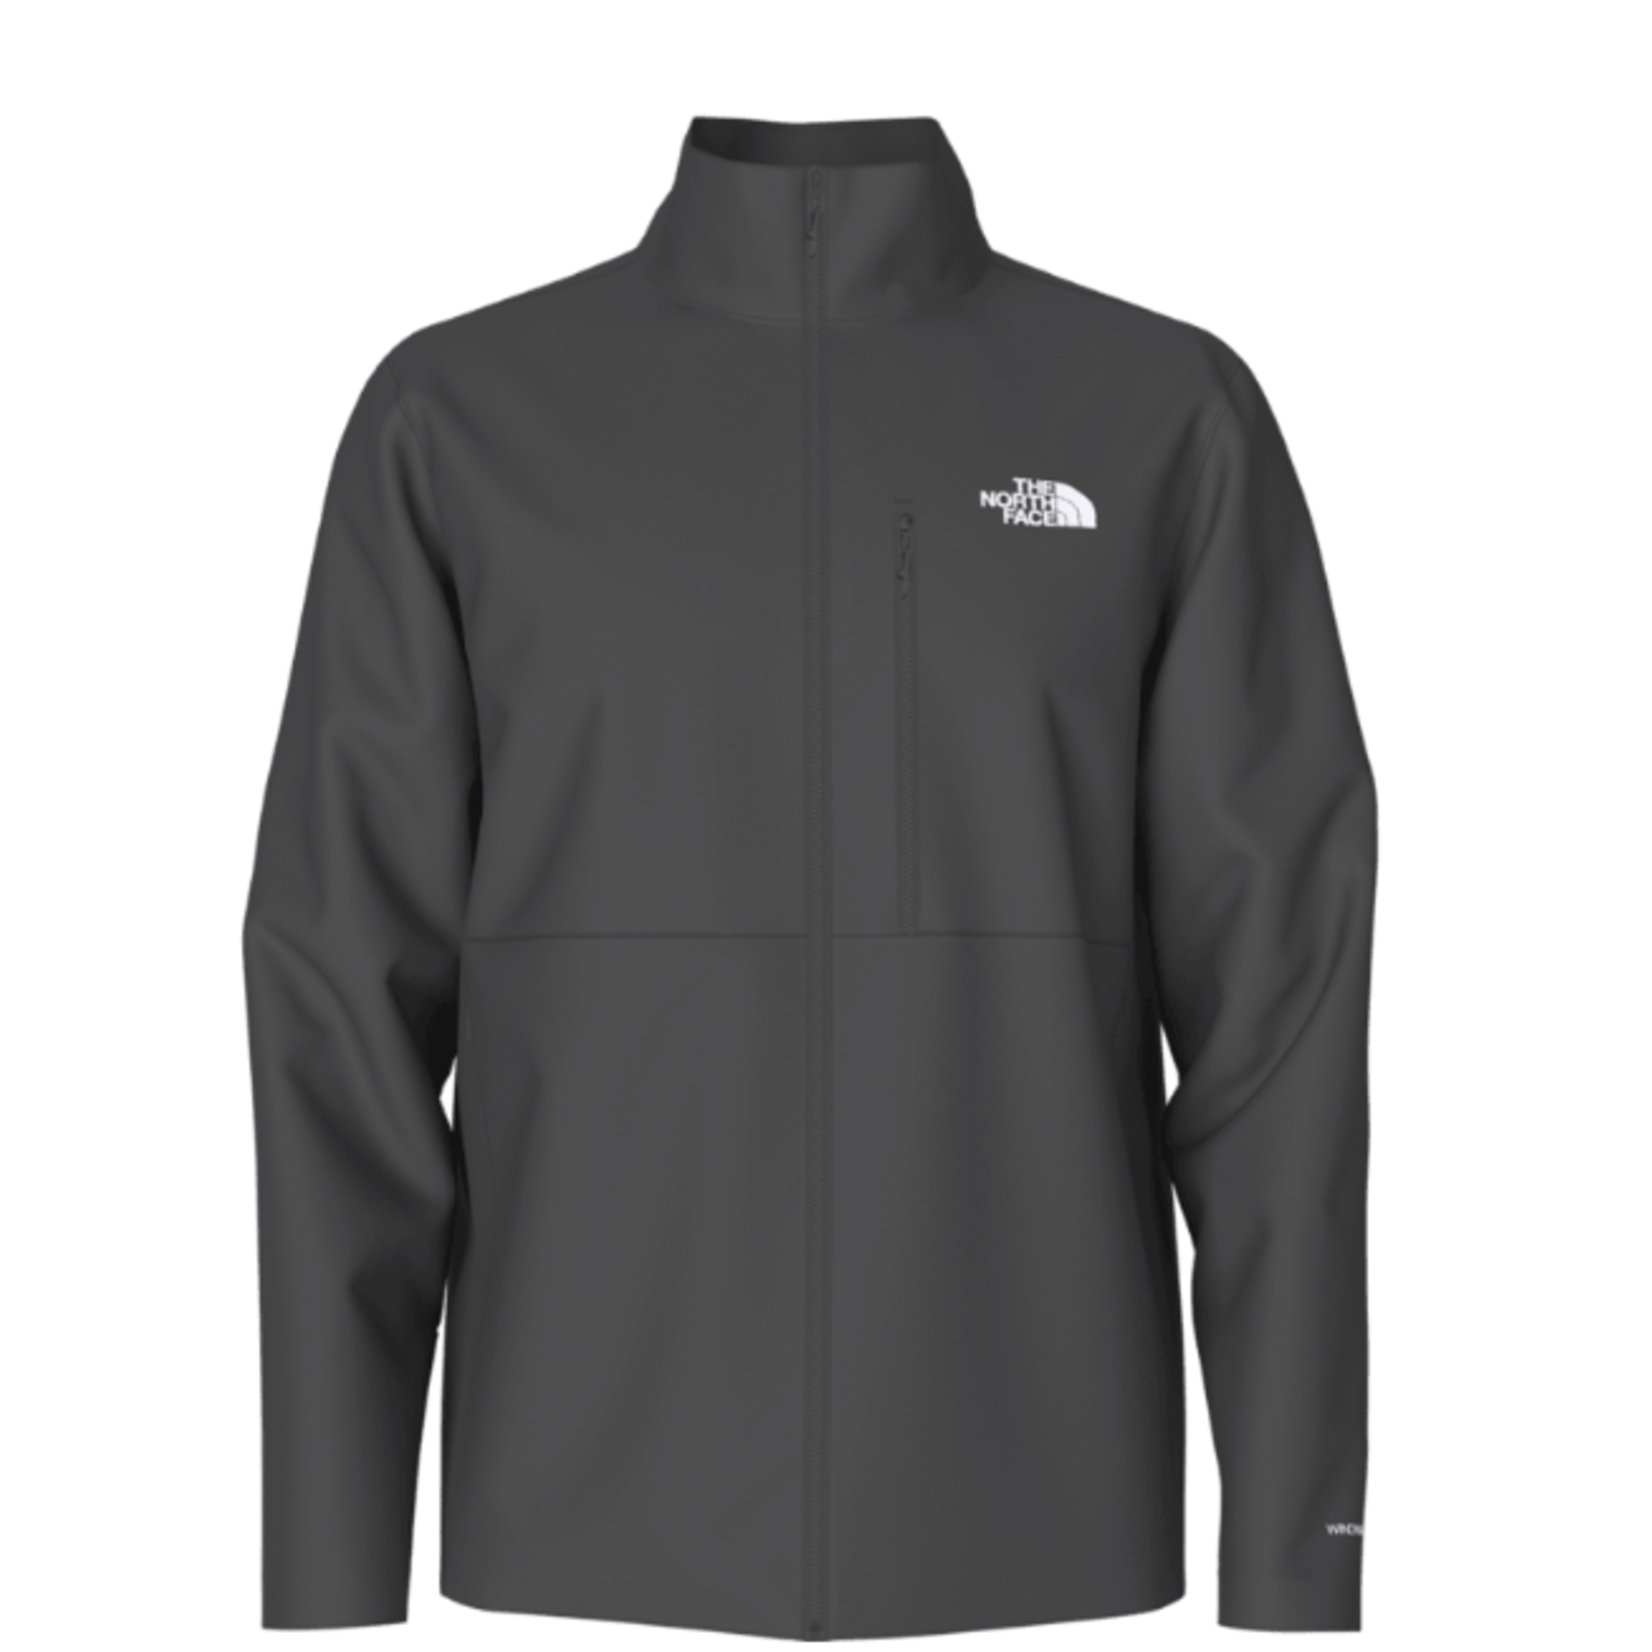 The North Face The North Face Jacket, Apex Bionic 3, Mens